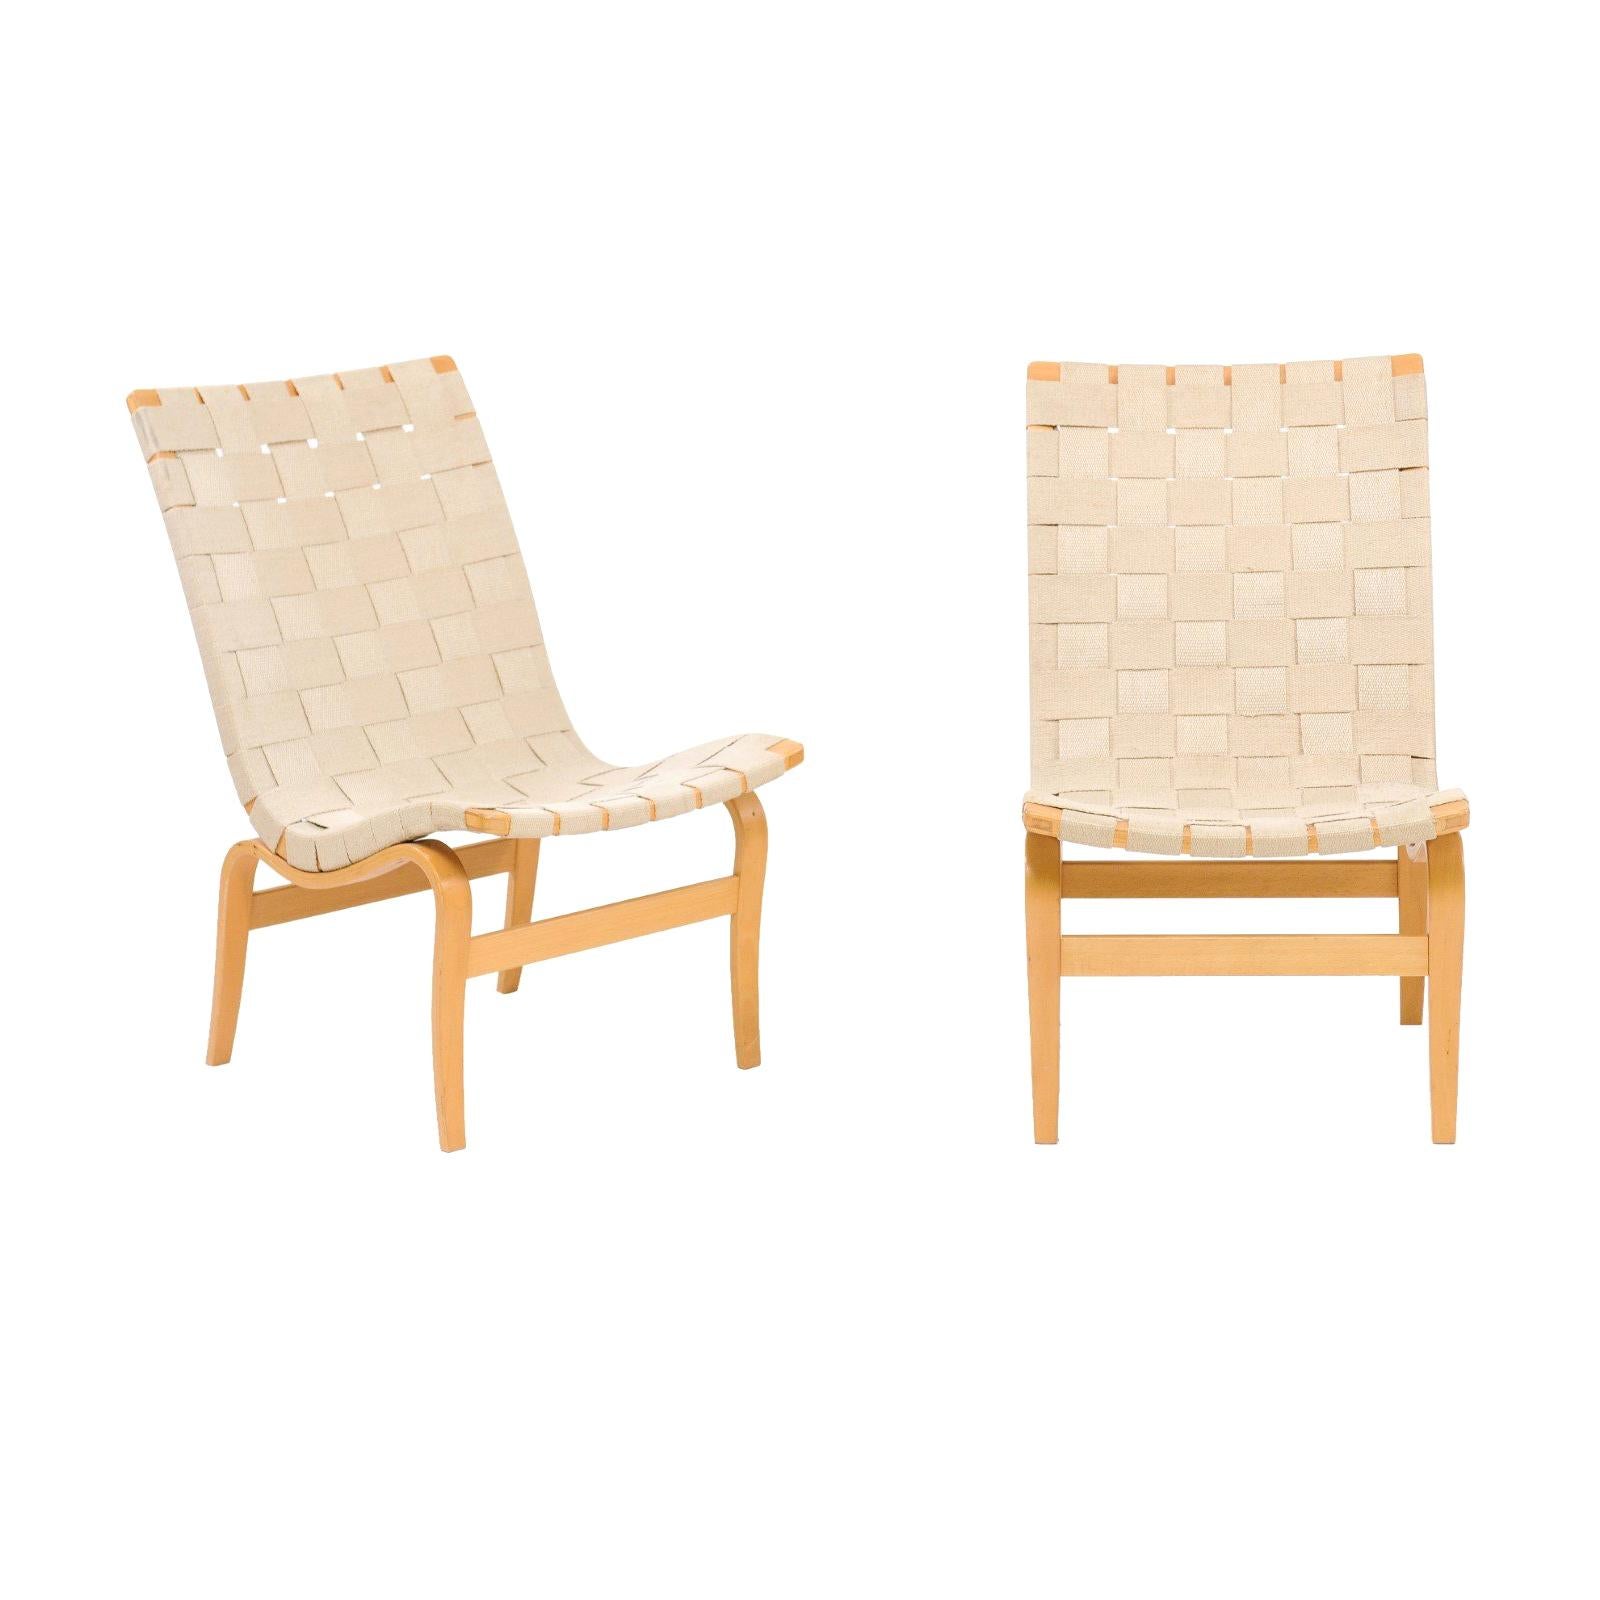 Pair of Midcentury Signed Bruno Mathsson for DUX Armless Eva Chairs